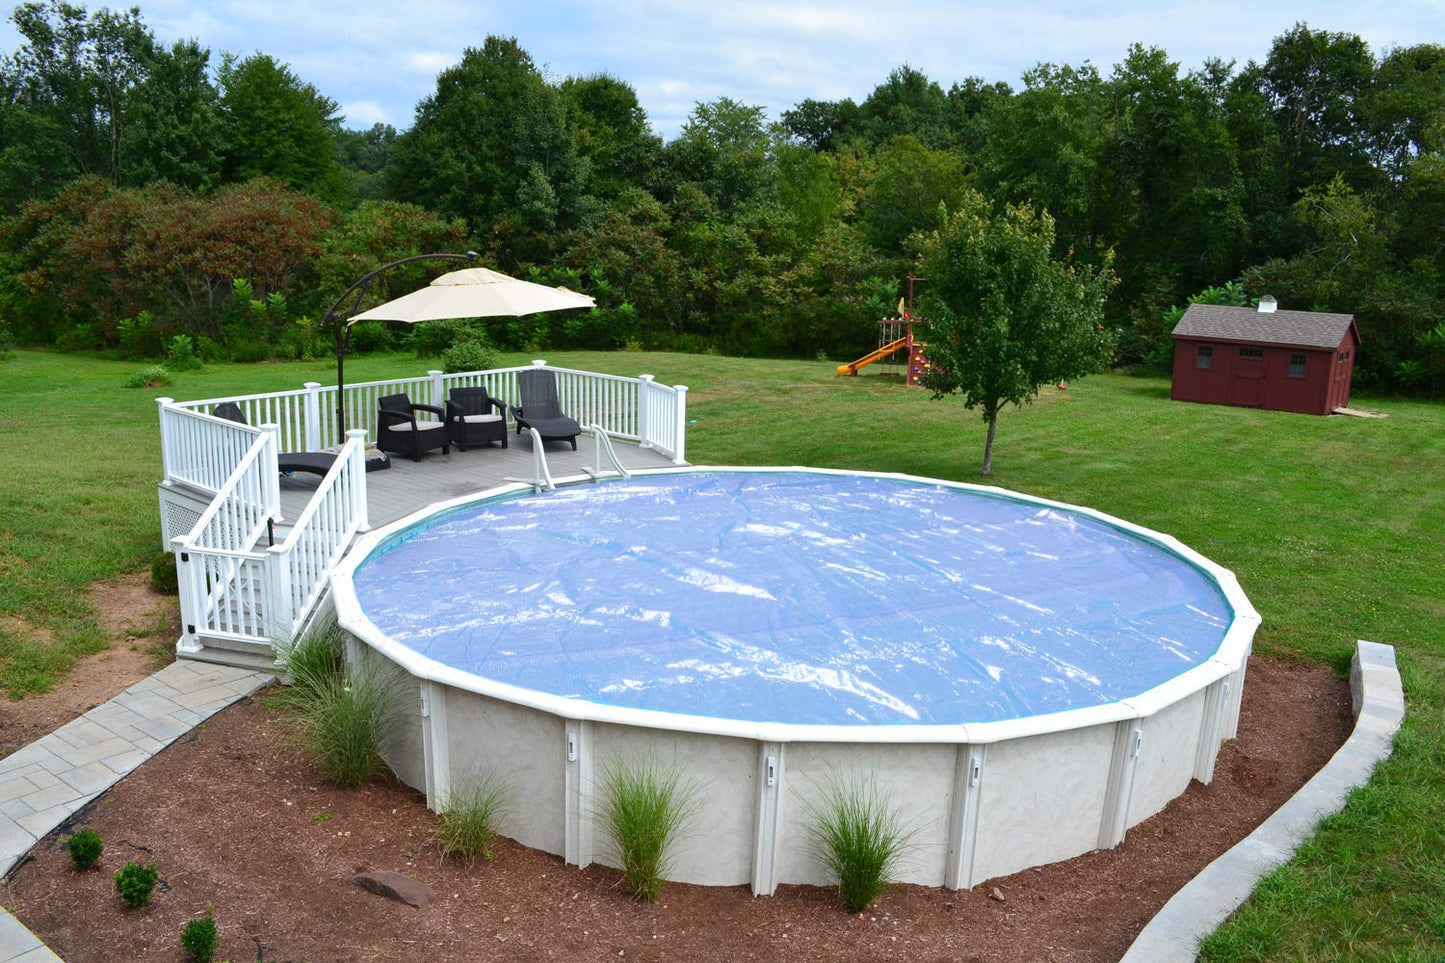 Sun2Solar Clear 33-Foot Round Solar Cover | 1600 Series | Heat Retaining Blanket for In-Ground and Above-Ground Round Swimming Pools | Use Sun to Heat Pool Water | Bubble-Side Facing Down in Pool 33' Round